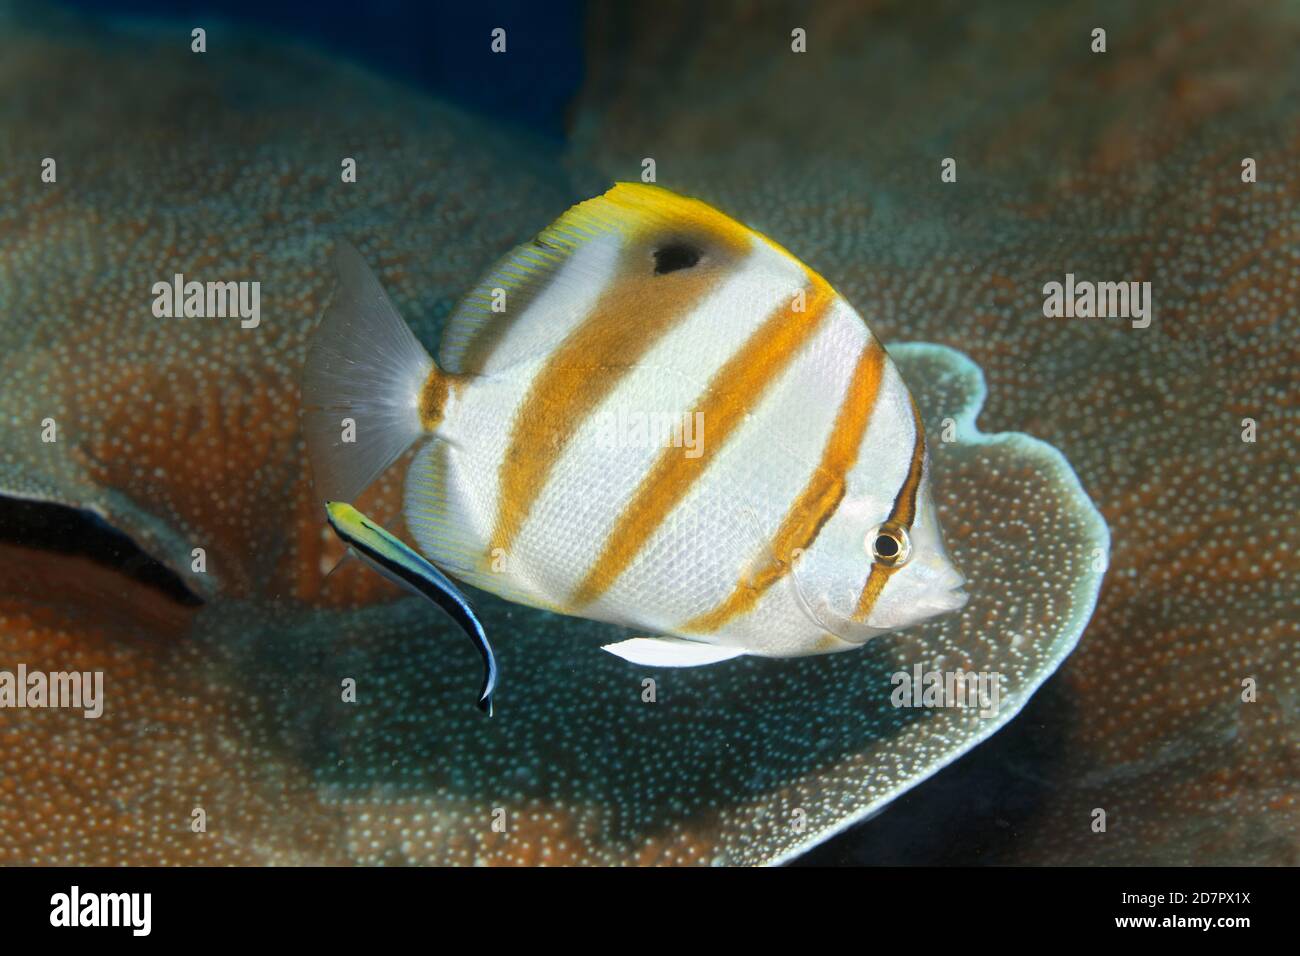 Sixspine butterflyfish (Parachaetodon ocellatus), with cleaner wrasse (Labroides dimidiatus), swimming over Montipora hard coral (Montipora Stock Photo